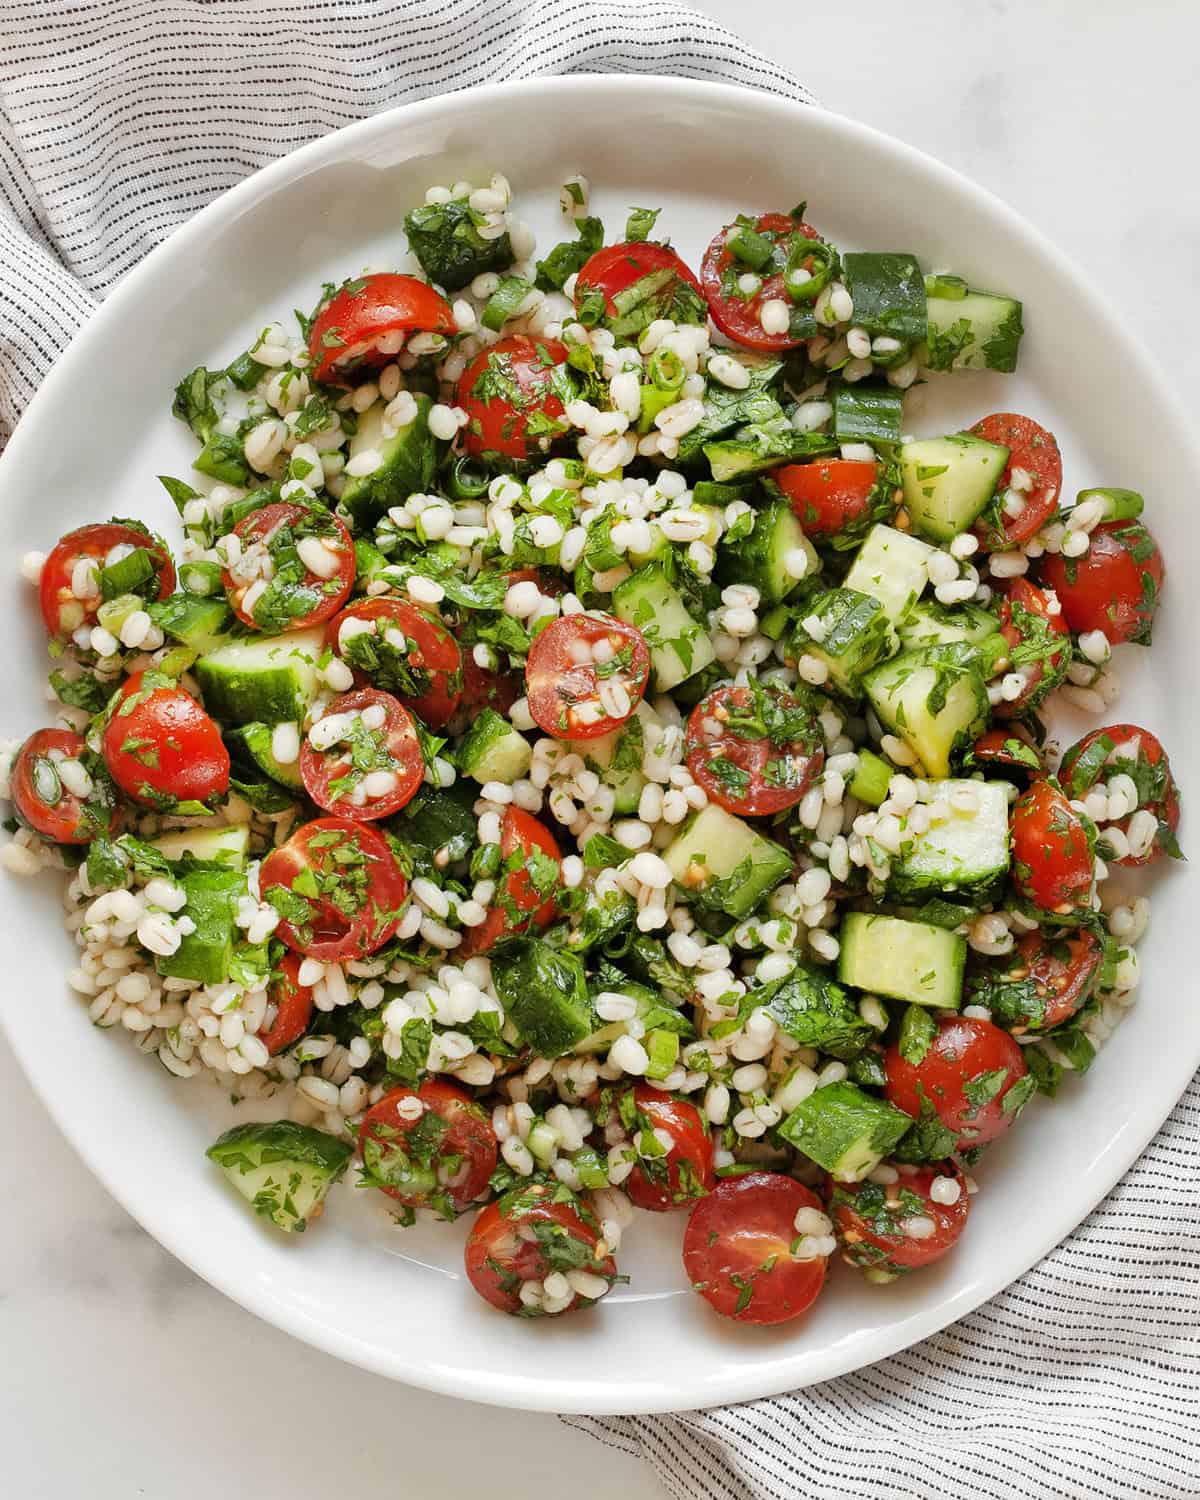 Tabbouleh salad on a plate.